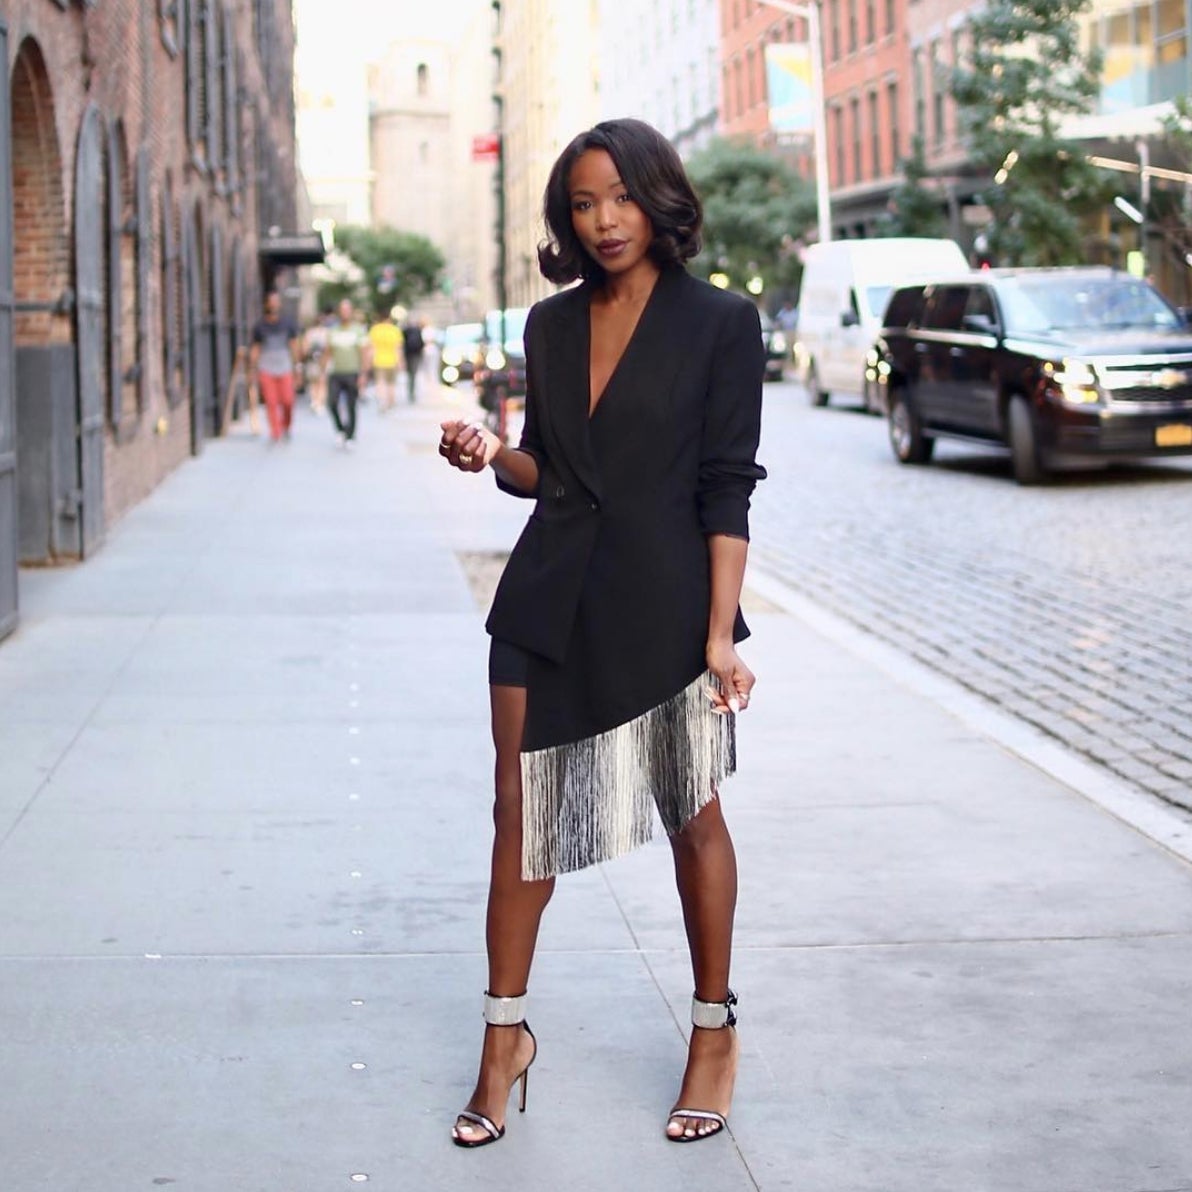 ESSENCE 25 Most Stylish: Kahlana Barfield Brown Is A Fabulous Young Style Icon Sprinkling Black Girl Magic Across The Globe